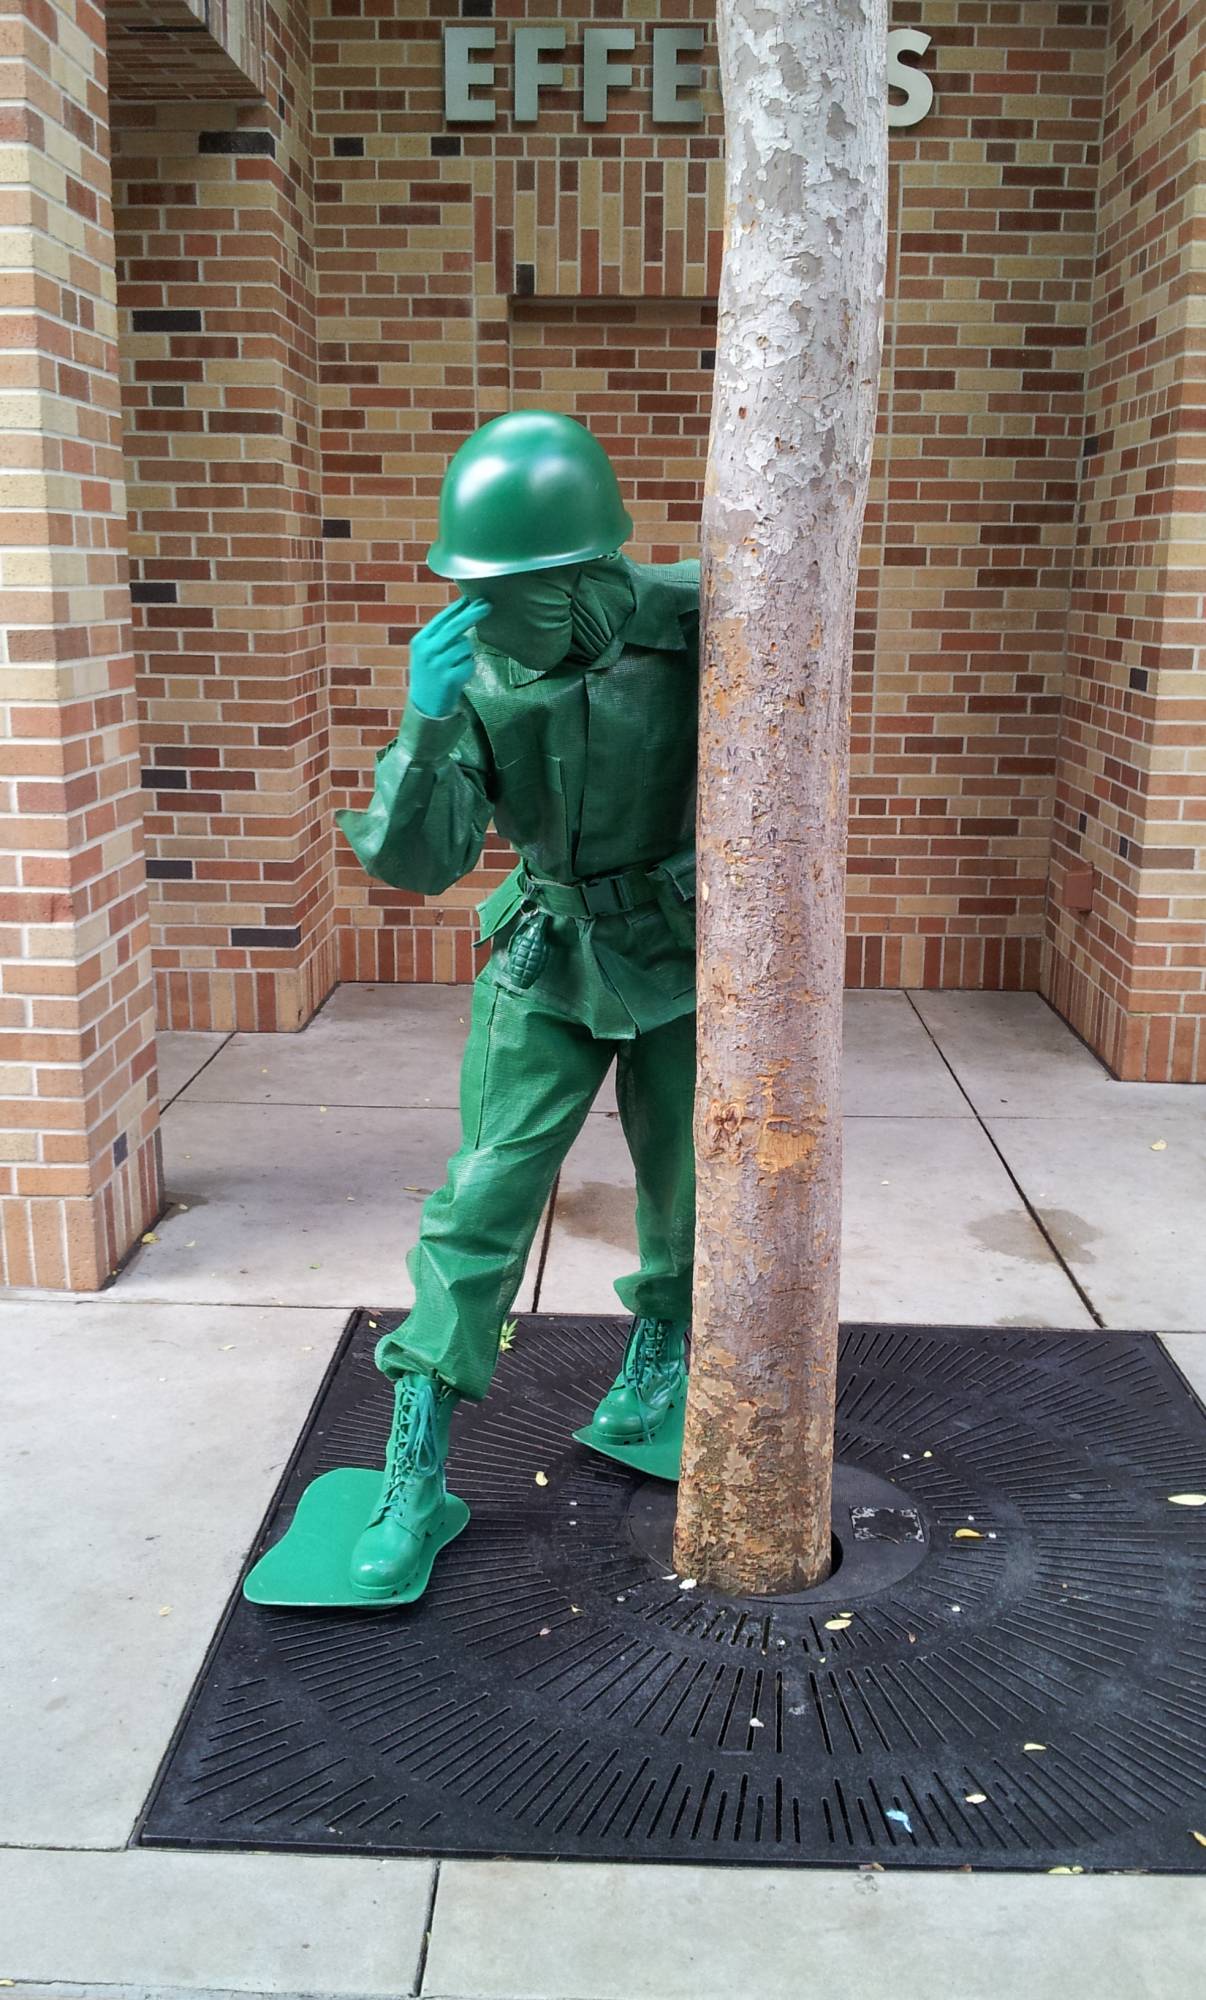 Army Man standing guard